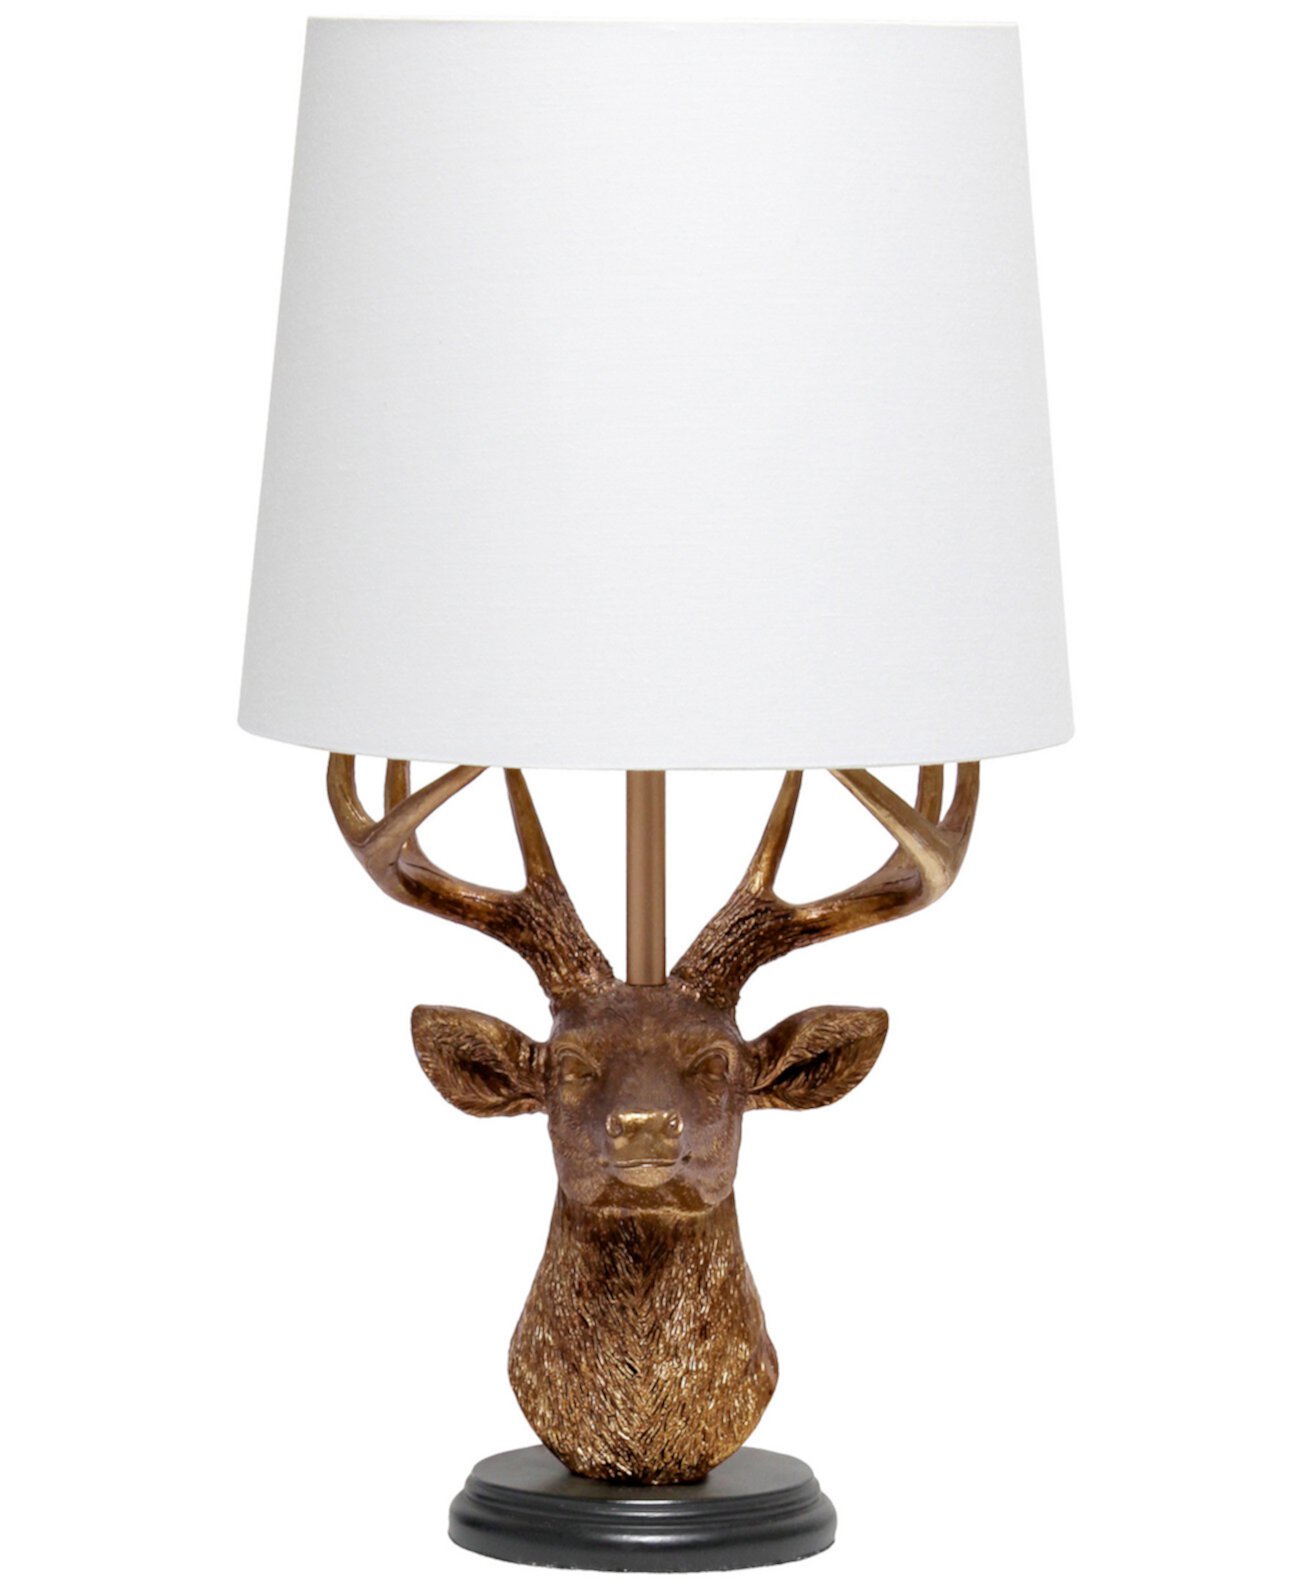 Woodland 17.25" Tall Rustic Antler Copper Deer Bedside Table Desk Lamp with Tapered White Fabric Shade Simple Designs